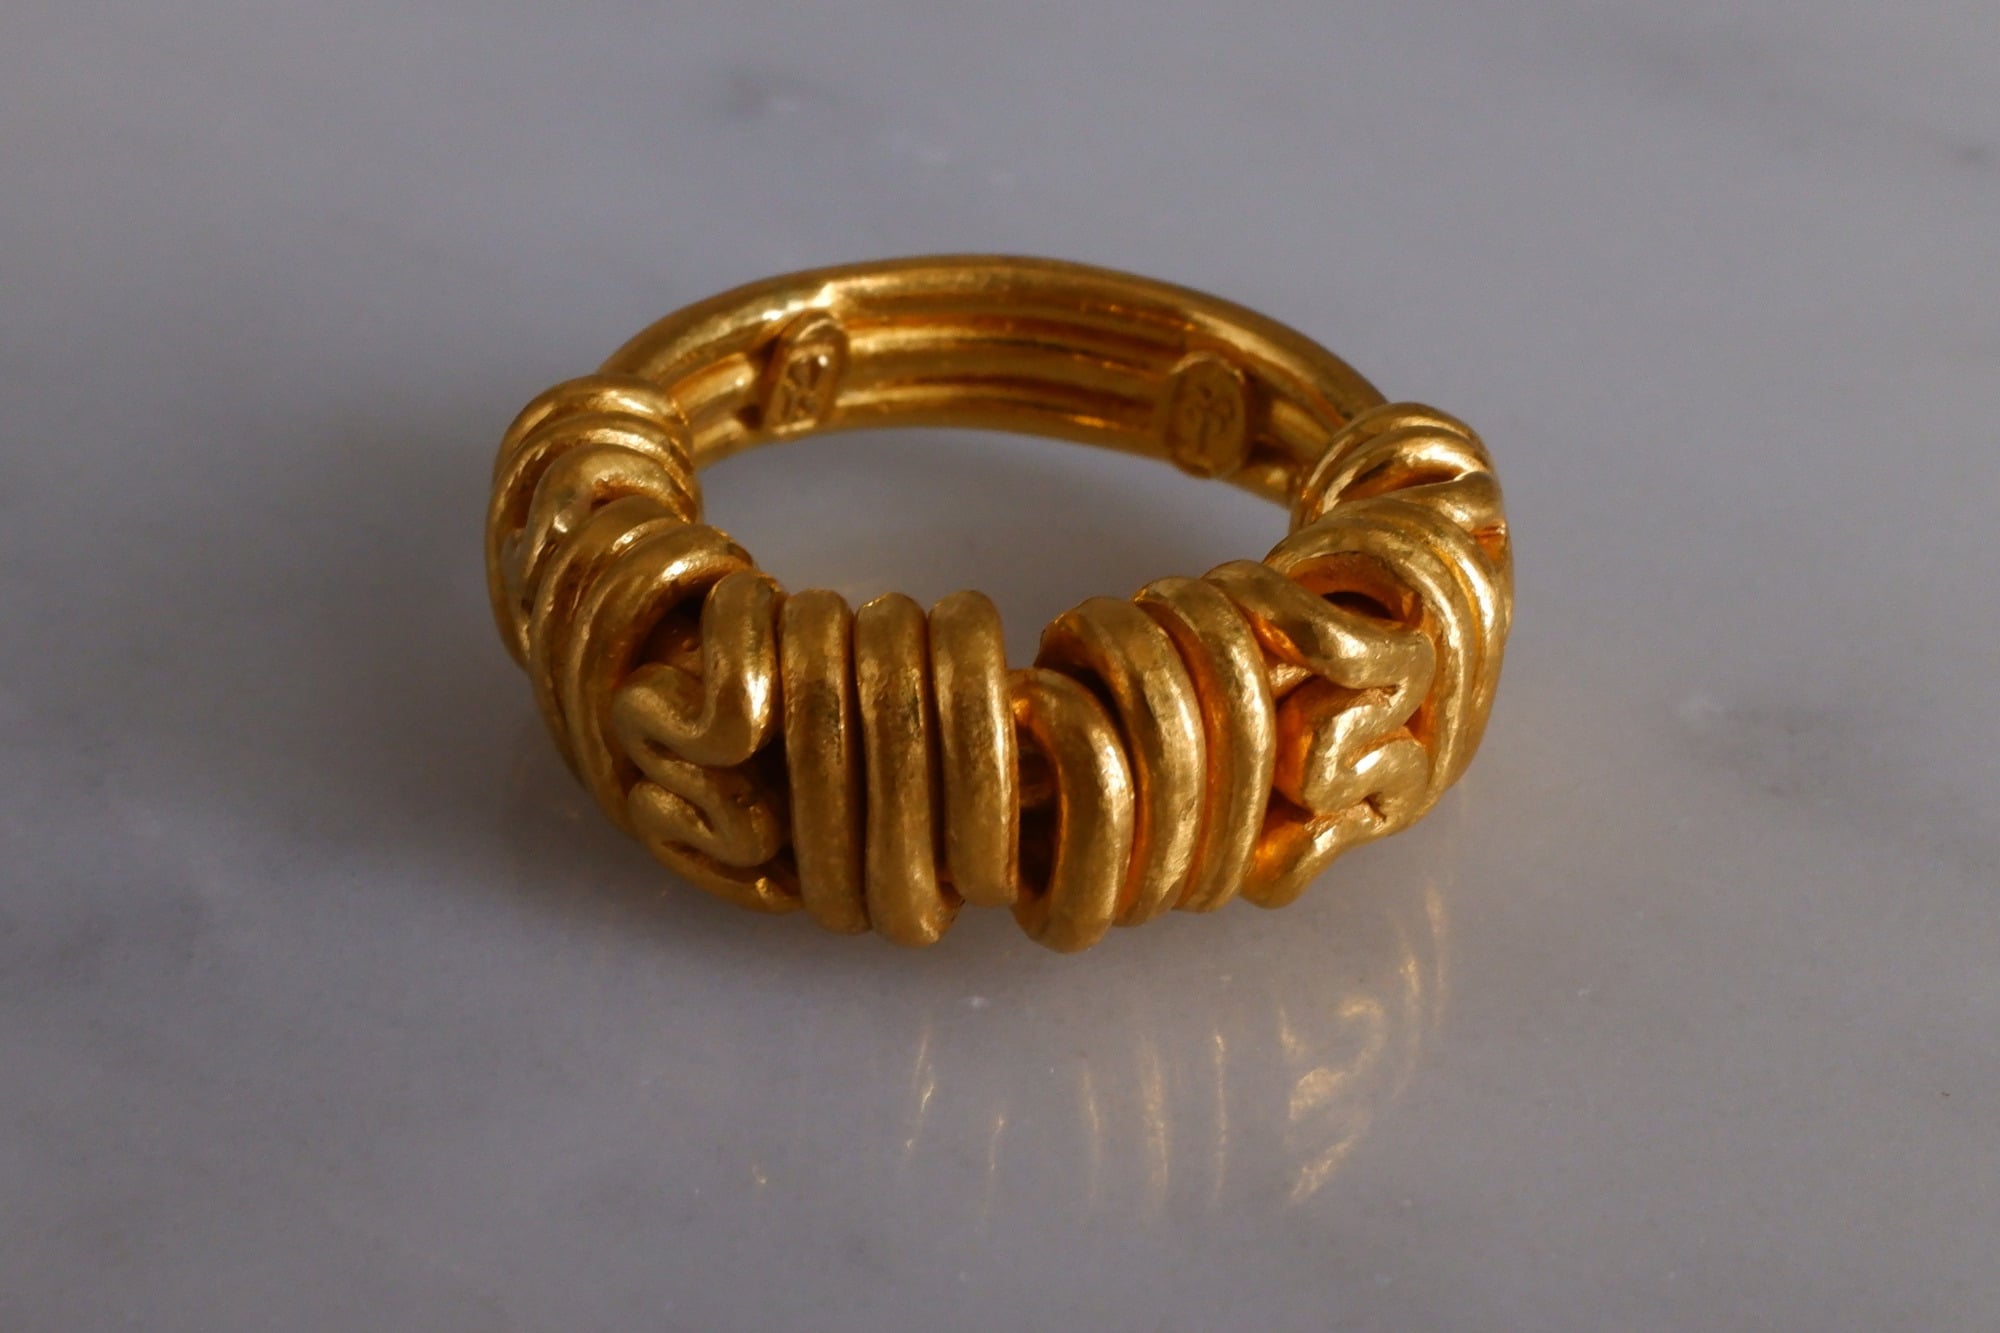 Puzzle Ring Mens, thick gold ring mens, 24k solid gold ring mens, 24k gold ring singapore, historical gold jewelry, sijs